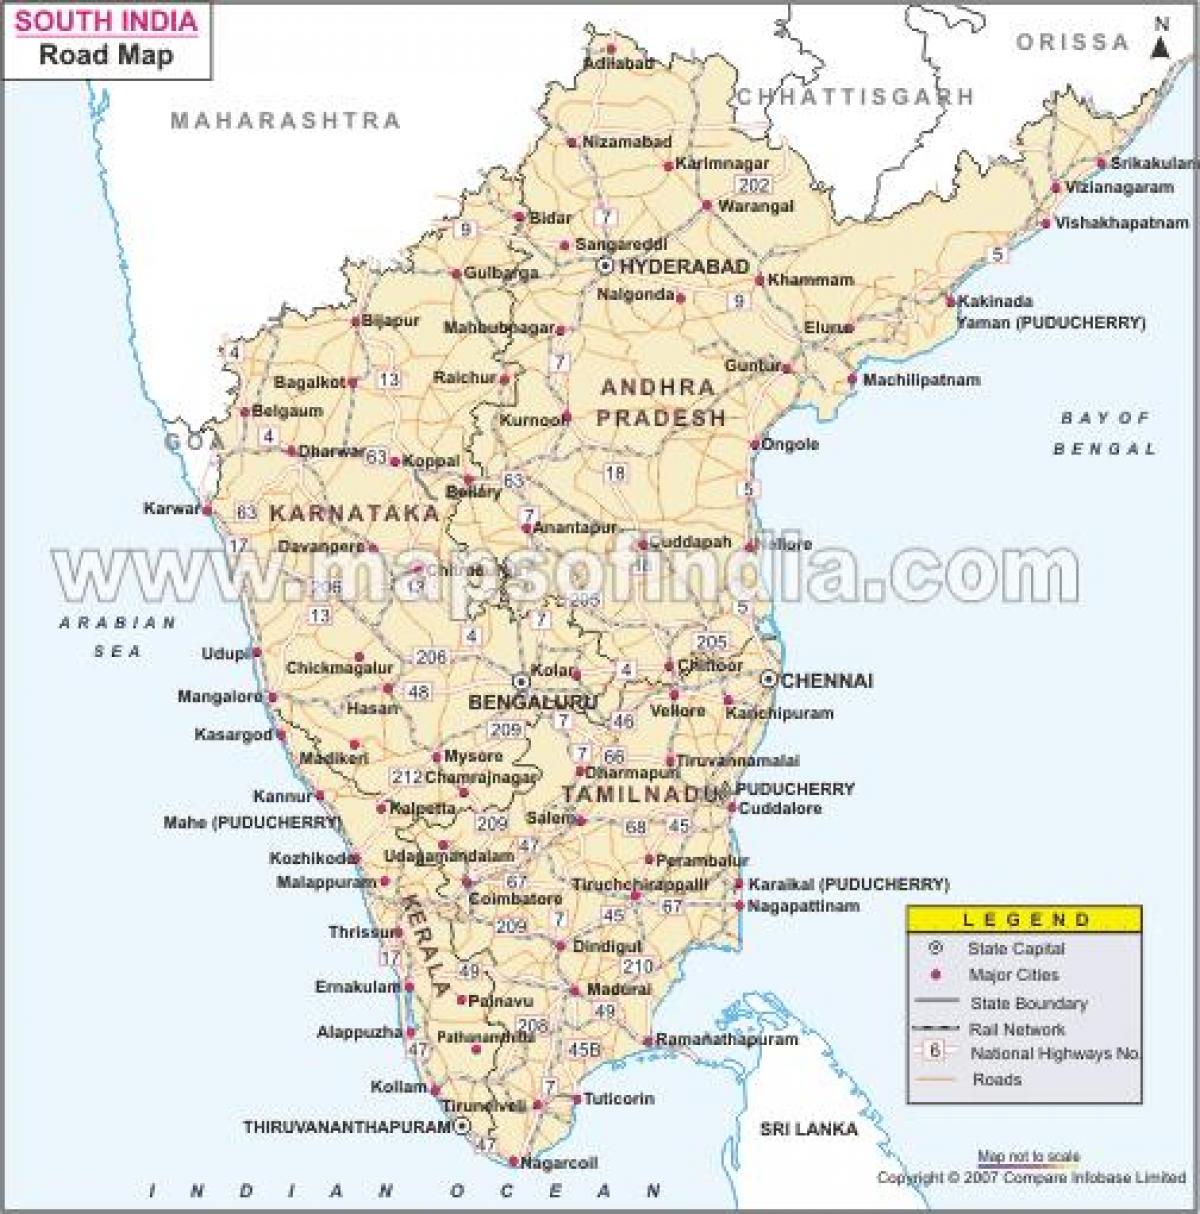 road map of south india South Indian Road Map Road Map South India Southern Asia Asia road map of south india